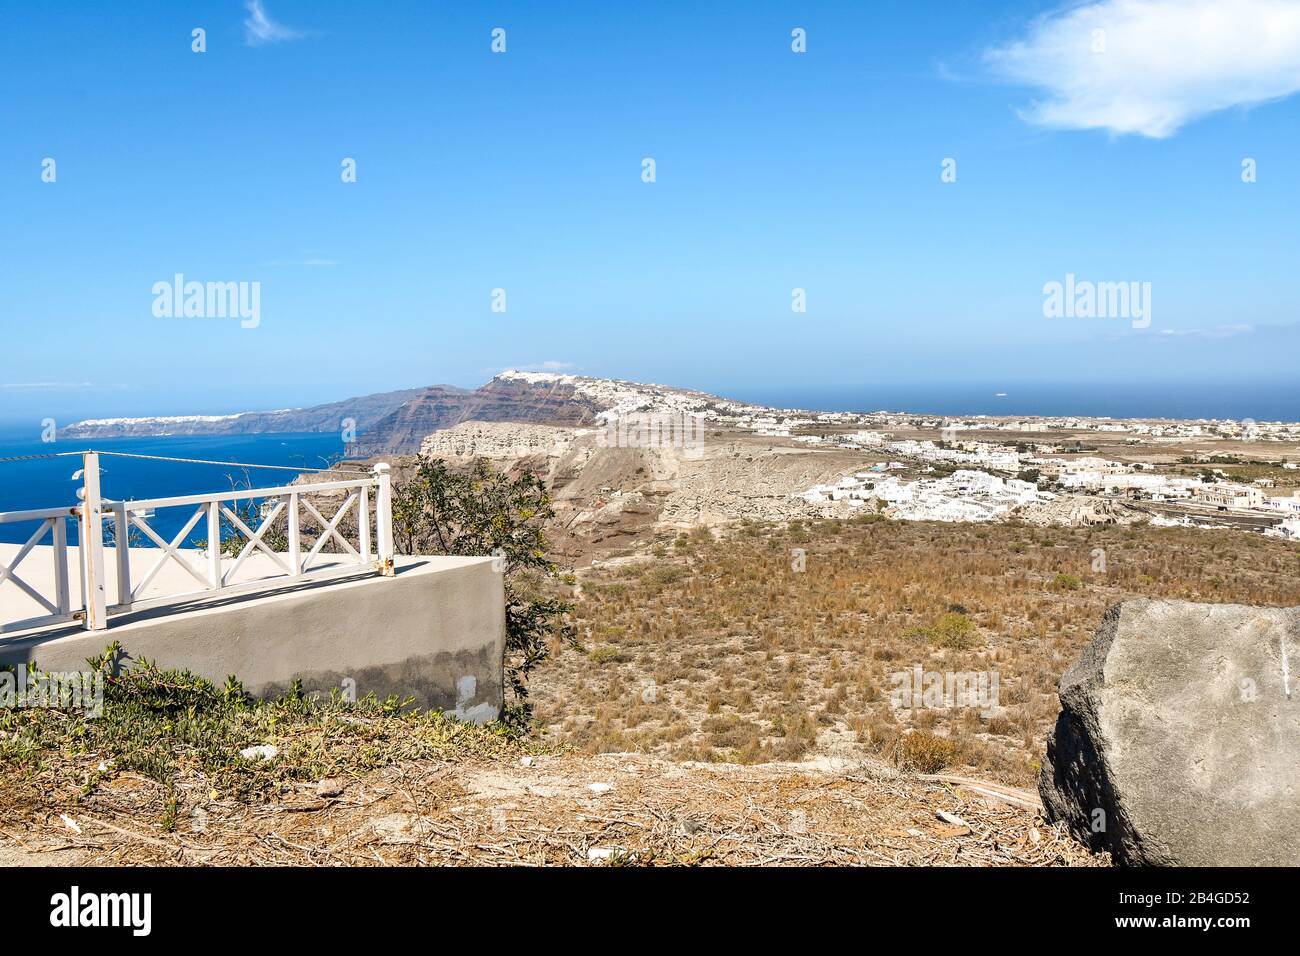 Summer day view of the whitewashed towns of Oia and Fira and desert landscape, sea and cliffs on the Aegean island of Santorini, Greece. Stock Photo